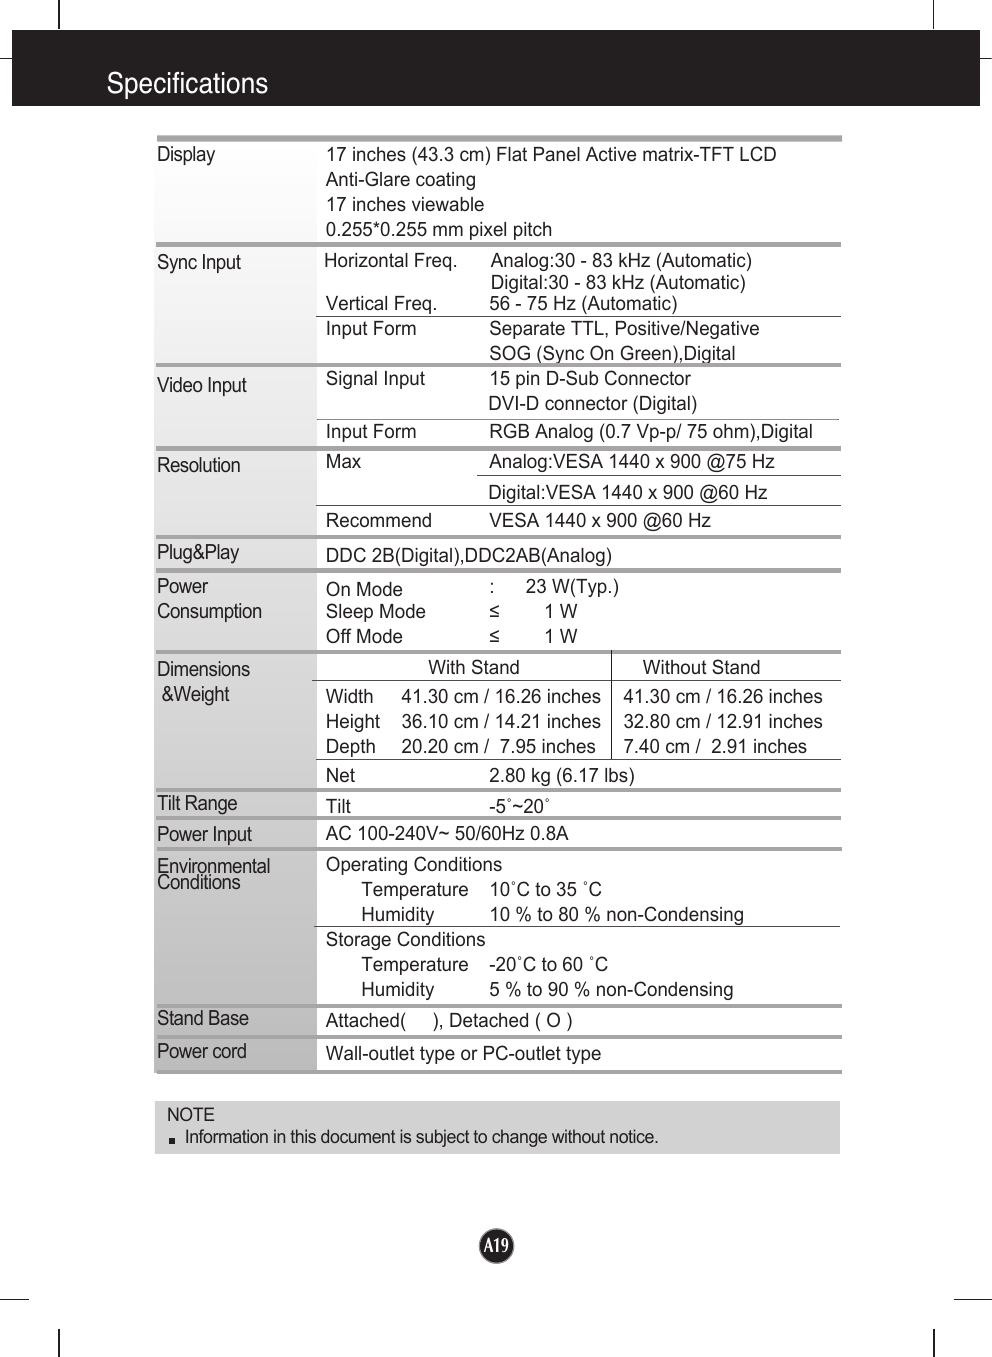 A19A19Specifications  NOTEInformation in this document is subject to change without notice.DisplaySync InputVideo InputResolutionPlug&amp;PlayPowerConsumptionDimensions&amp;WeightTilt RangePower InputEnvironmentalConditionsStand BasePower cord 17 inches (43.3 cm) Flat Panel Active matrix-TFT LCD Anti-Glare coating17 inches viewable0.255*0.255 mm pixel pitchHorizontal Freq. Analog:30 - 83 kHz (Automatic)Digital:30 - 83 kHz (Automatic)Vertical Freq. 56 - 75 Hz (Automatic)Input Form Separate TTL, Positive/NegativeSOG (Sync On Green),Digital Signal Input 15 pin D-Sub ConnectorDVI-D connector (Digital)Input Form RGB Analog (0.7 Vp-p/ 75 ohm),DigitalMax Analog:VESA 1440 x 900 @75 HzDigital:VESA 1440 x 900 @60 HzRecommend VESA 1440 x 900 @60 HzDDC 2B(Digital),DDC2AB(Analog)On Mode : 23 W(Typ.)Sleep Mode ≤ 1 WOff Mode ≤ 1 WWith Stand Without StandWidth 41.30 cm / 16.26 inches 41.30 cm / 16.26 inchesHeight 36.10 cm / 14.21 inches 32.80 cm / 12.91 inchesDepth 20.20 cm /  7.95 inches 7.40 cm /  2.91 inchesNet 2.80 kg (6.17 lbs)Tilt -5˚~20˚AC 100-240V~ 50/60Hz 0.8A Operating ConditionsTemperature 10˚C to 35 ˚CHumidity 10 % to 80 % non-CondensingStorage ConditionsTemperature -20˚C to 60 ˚CHumidity 5 % to 90 % non-CondensingAttached(     ), Detached ( O )Wall-outlet type or PC-outlet type